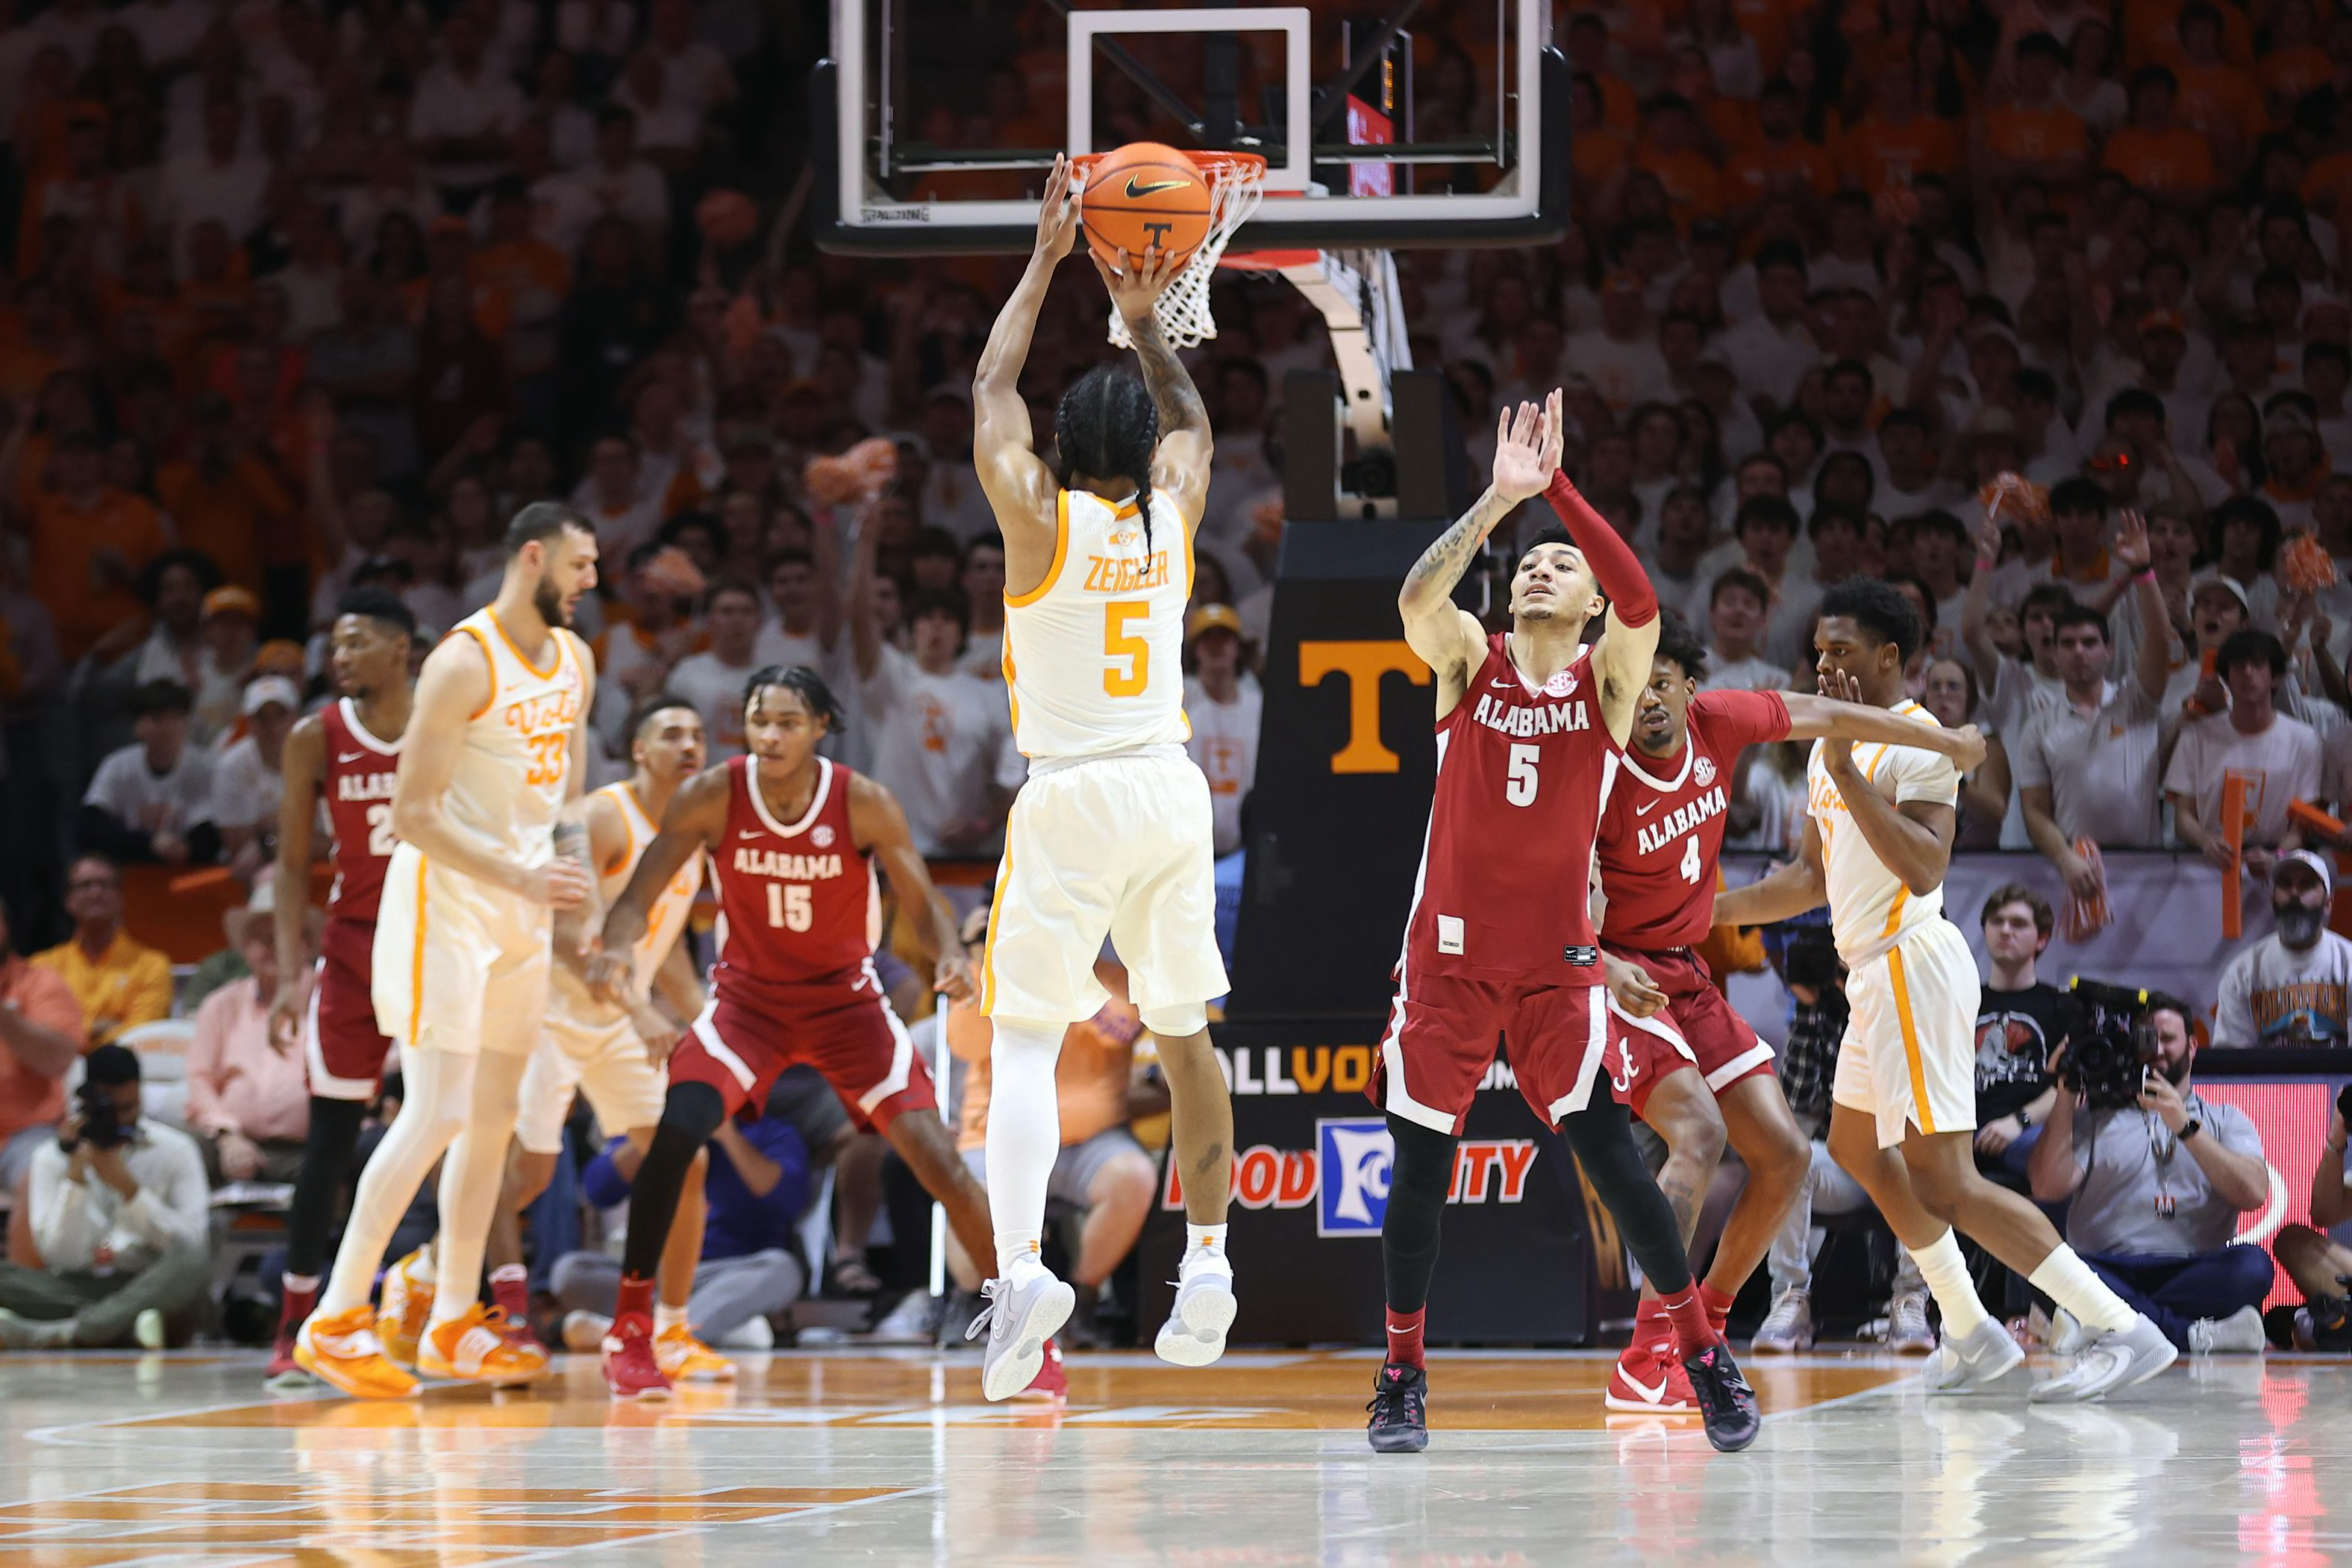 Tennessee Basketball Photo gallery from Vols’ 6859 win vs. Alabama